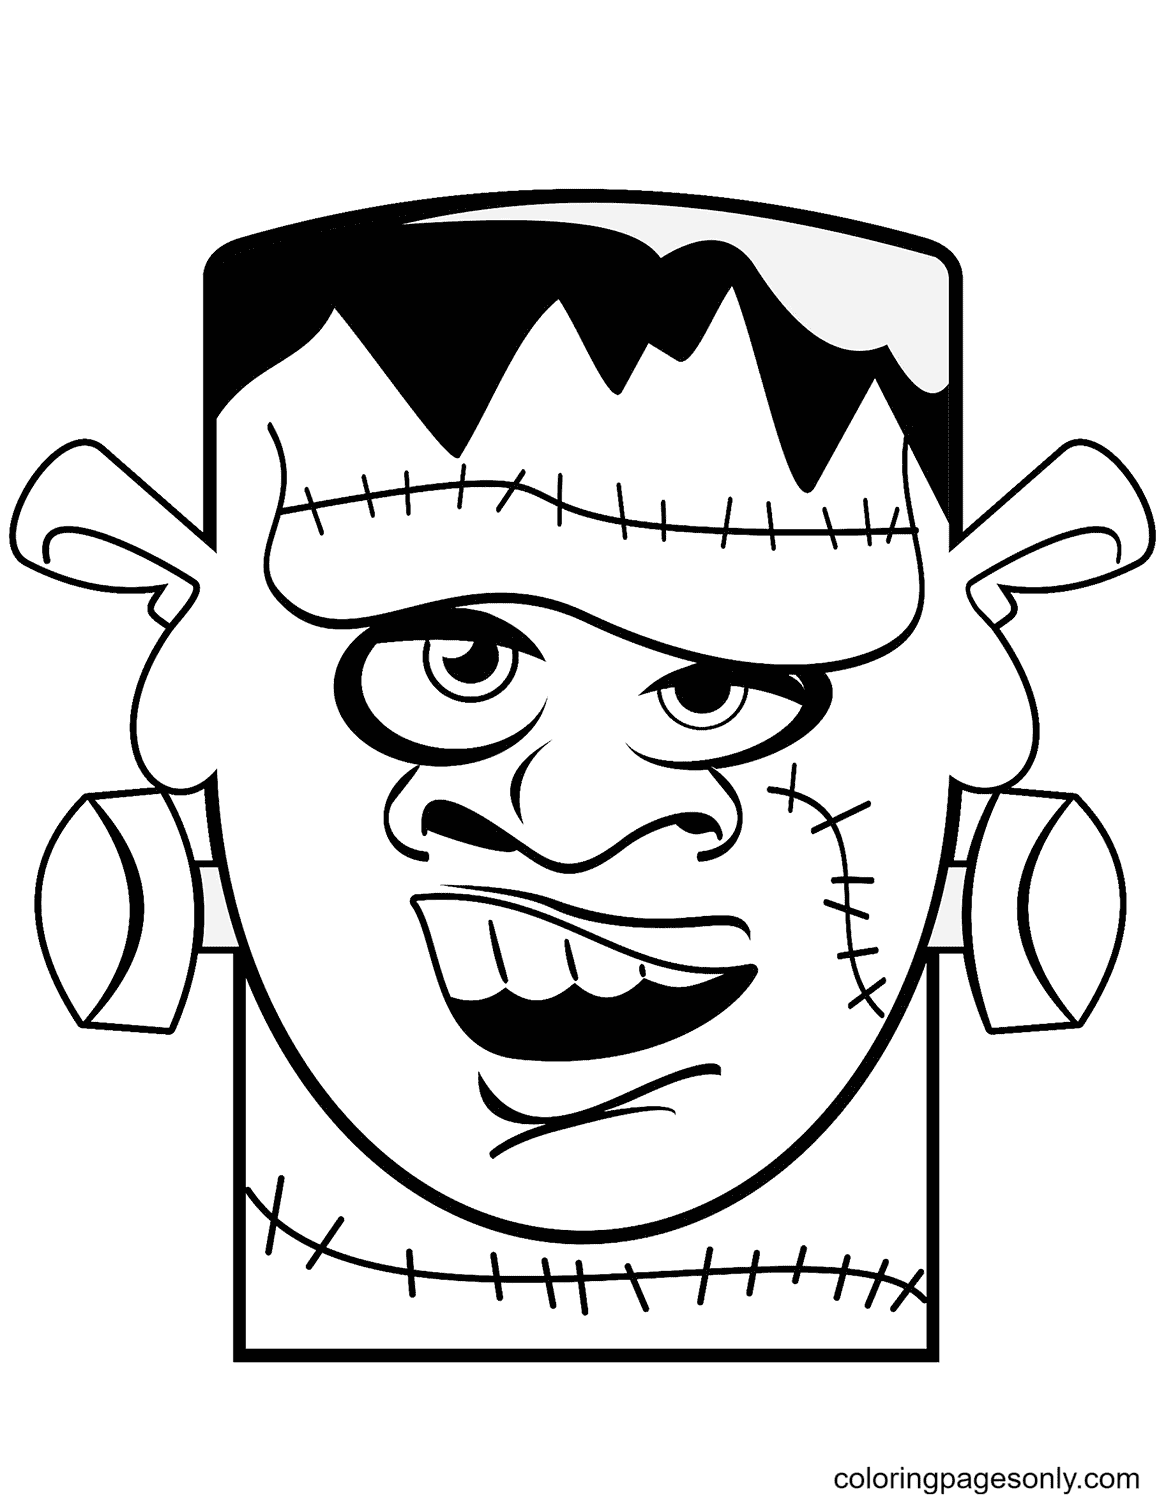 Frankenstein Head Coloring Pages